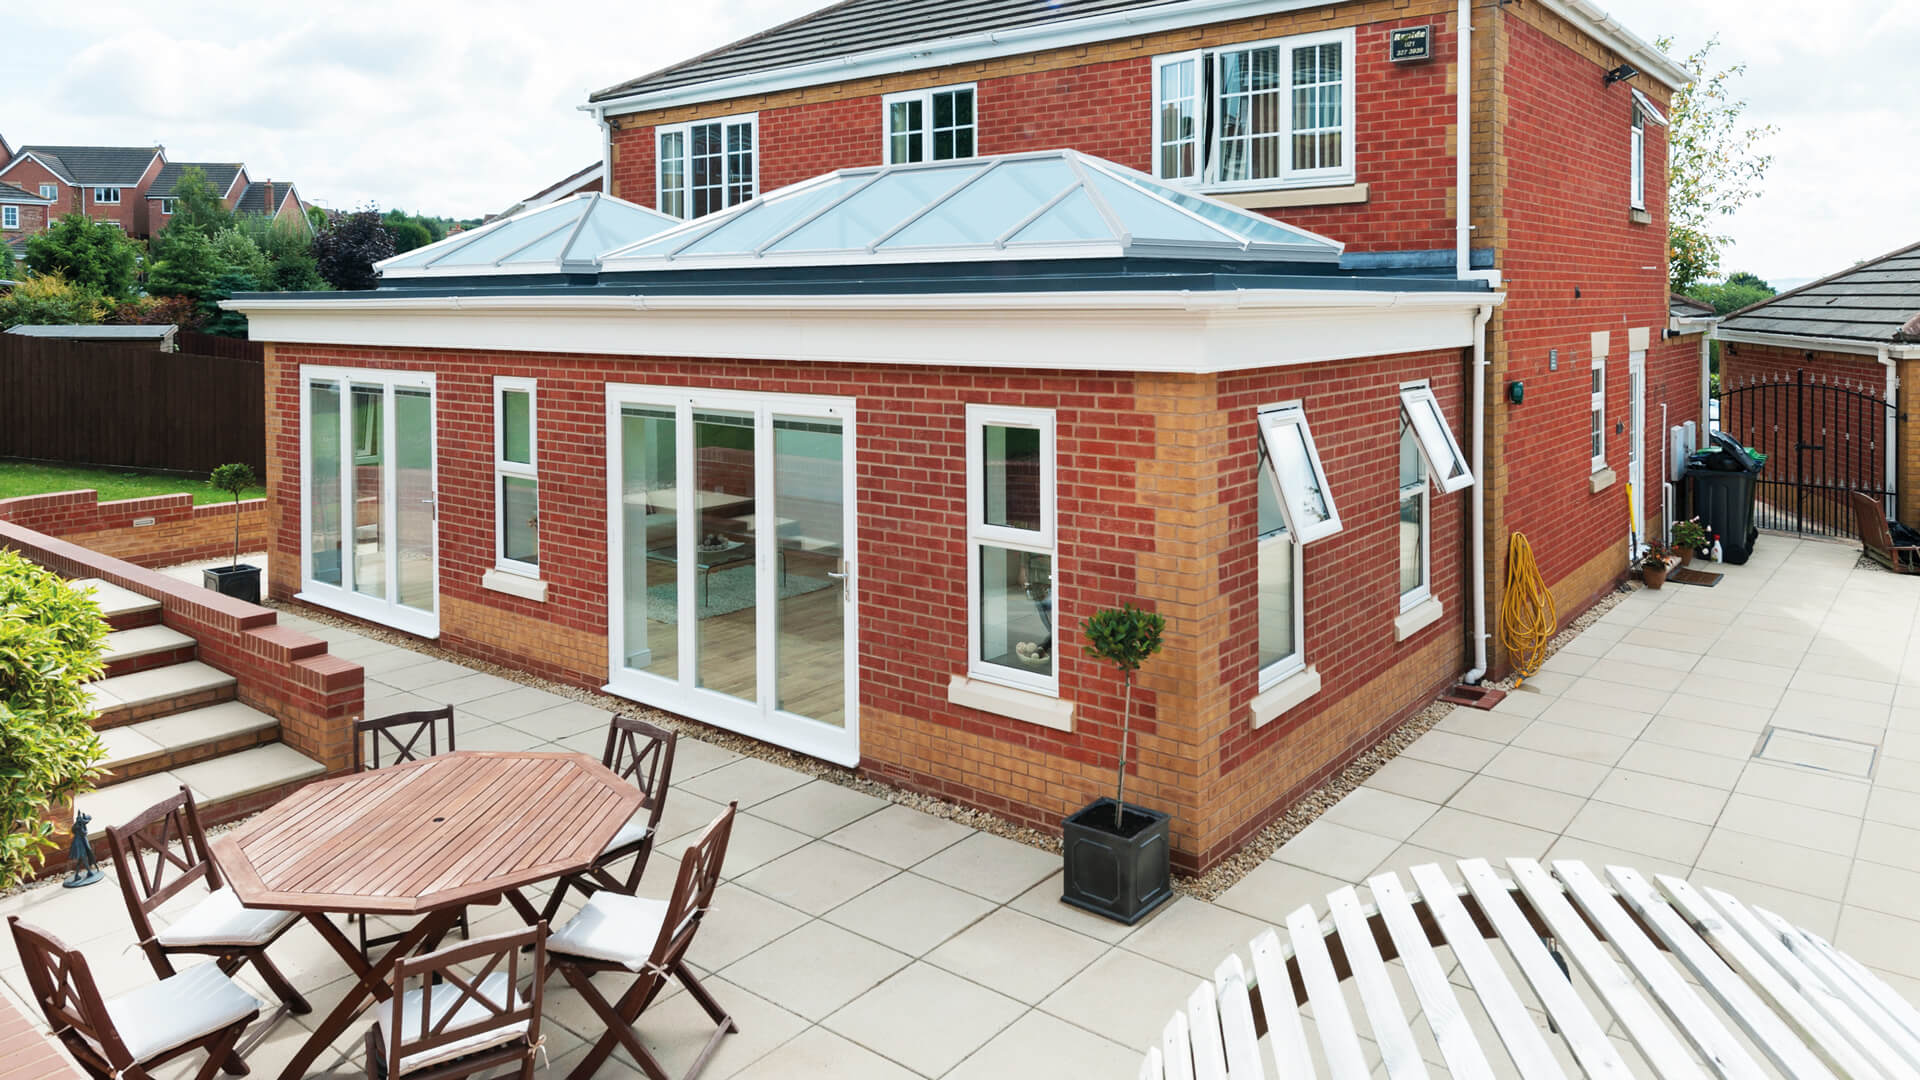 Flat Roof Extensions External Features